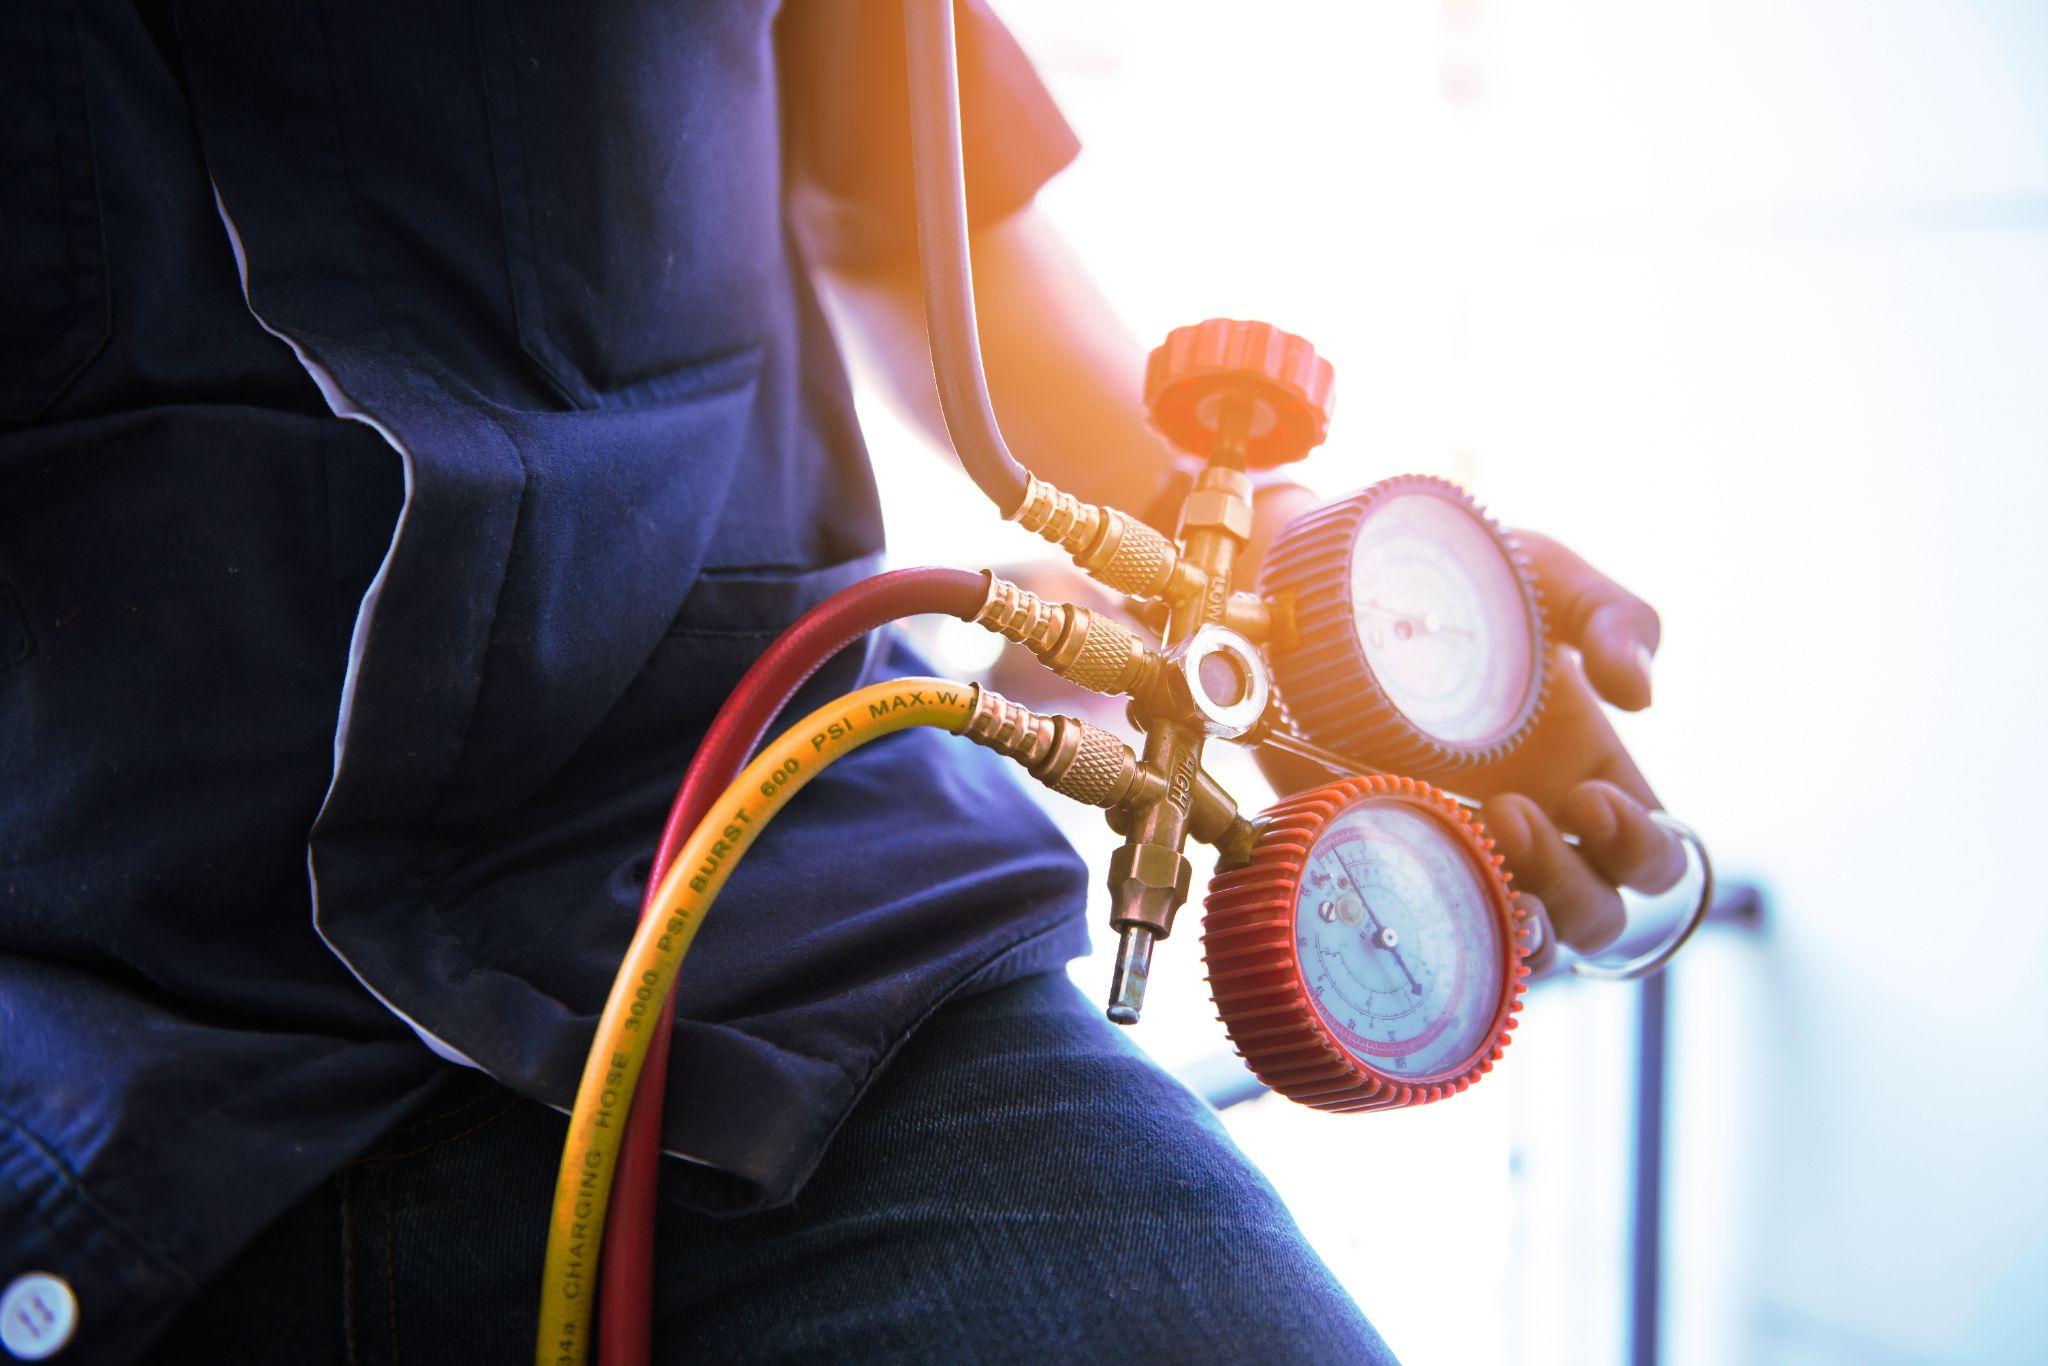 Technician hands holding a manometers on equipment for filling air conditioners.